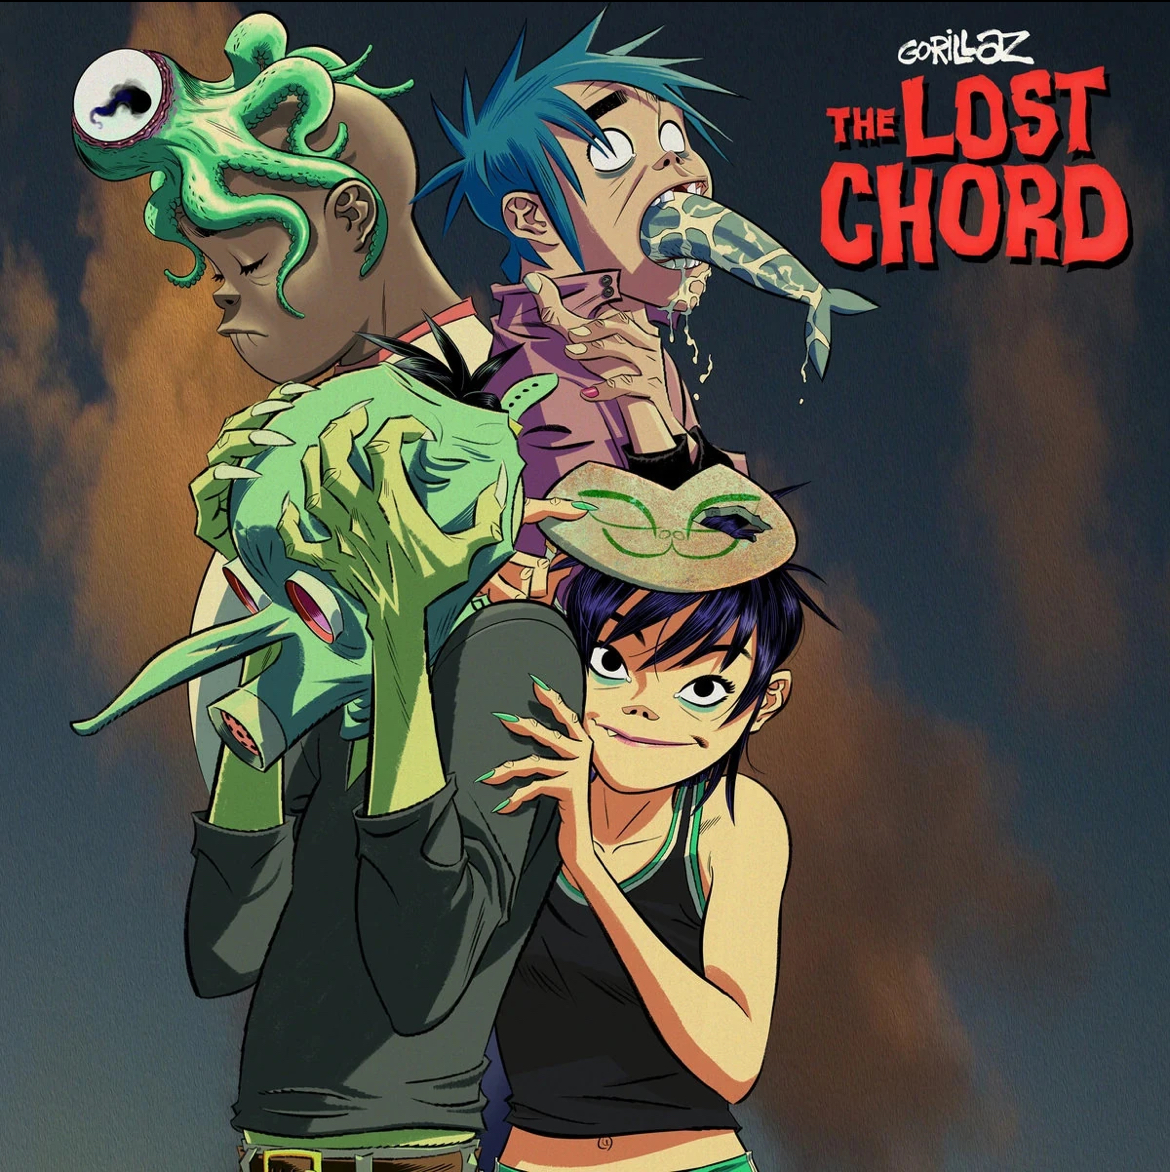 Gorillaz featuring Leee John — The Lost Chord cover artwork